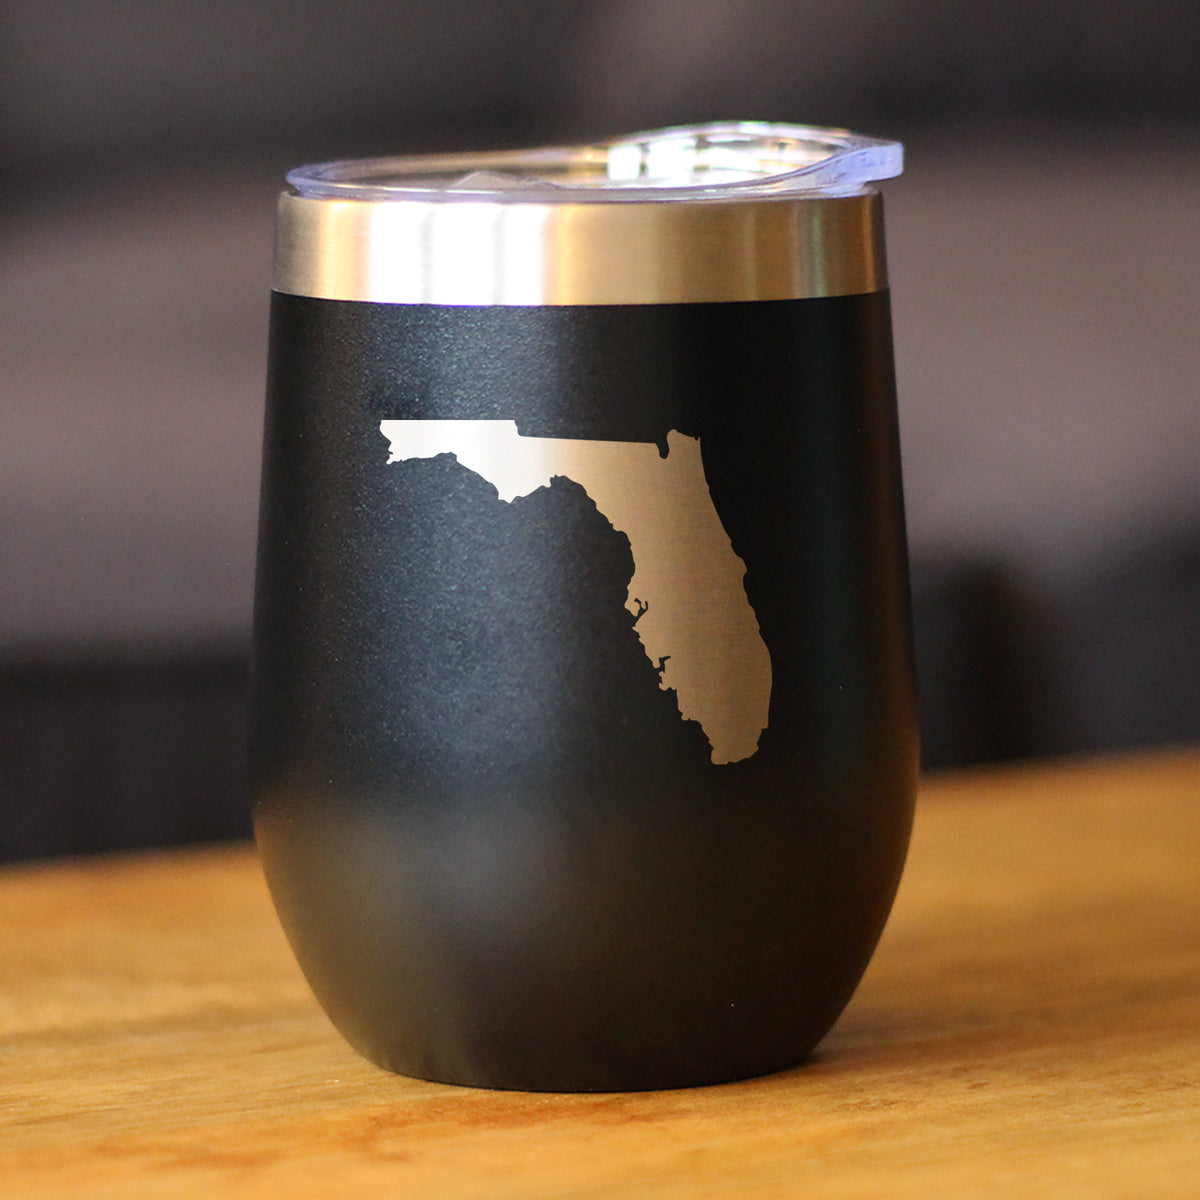 Florida State Outline - Wine Tumbler Glass with Sliding Lid - Stainless Steel Insulated Mug - State Themed Outdoor Camping Gifts For Floridians